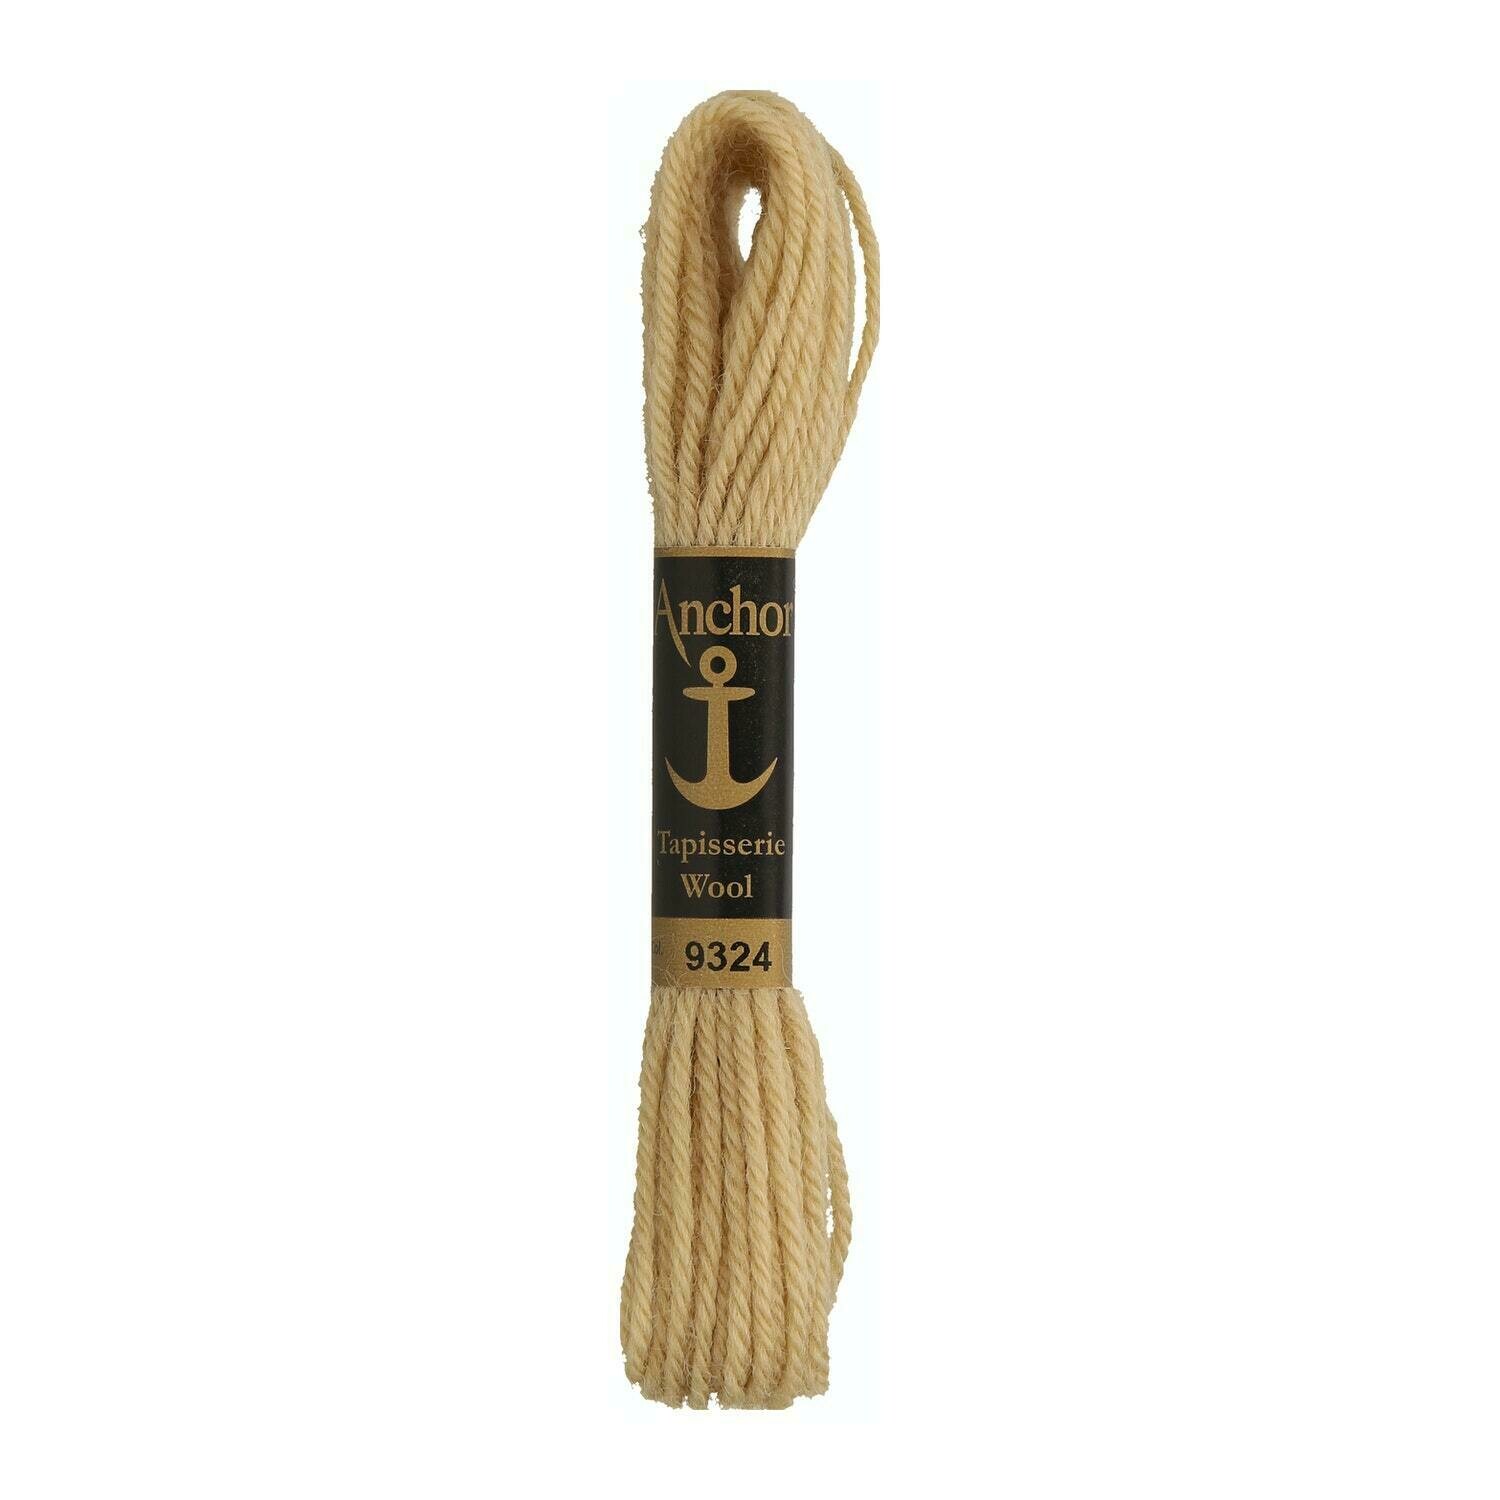 Anchor Tapisserie Wool #09324